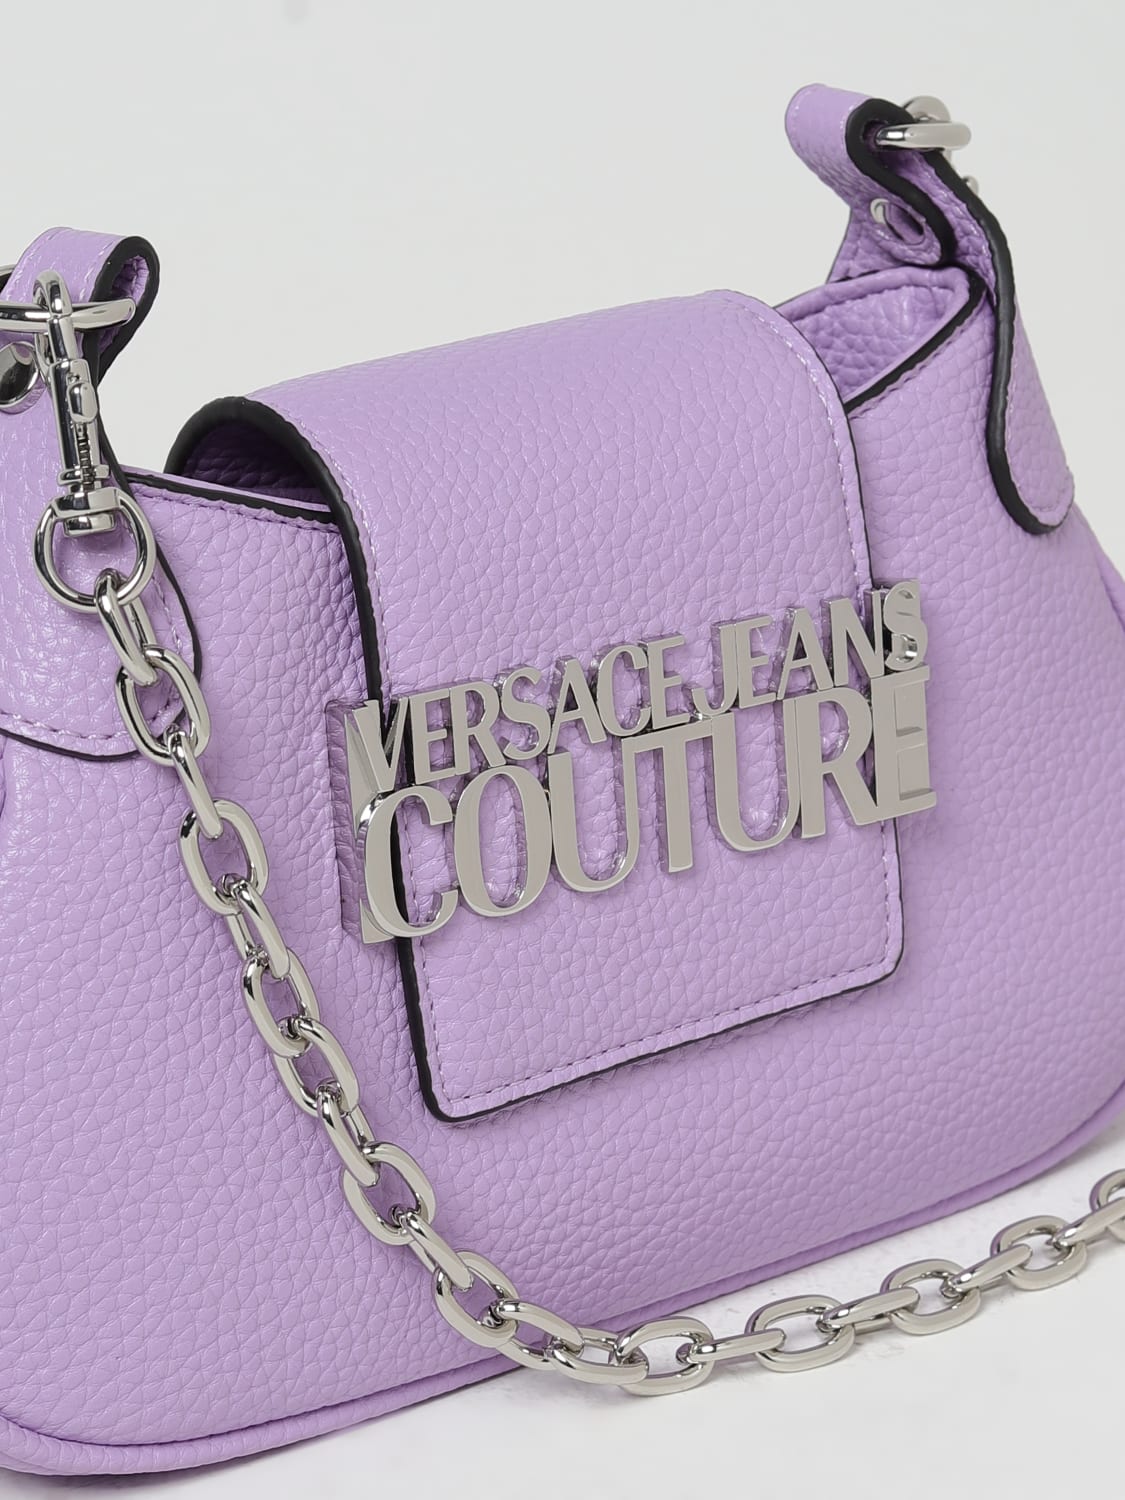 VERSACE JEANS COUTURE：クロスボディバッグ レディース ...